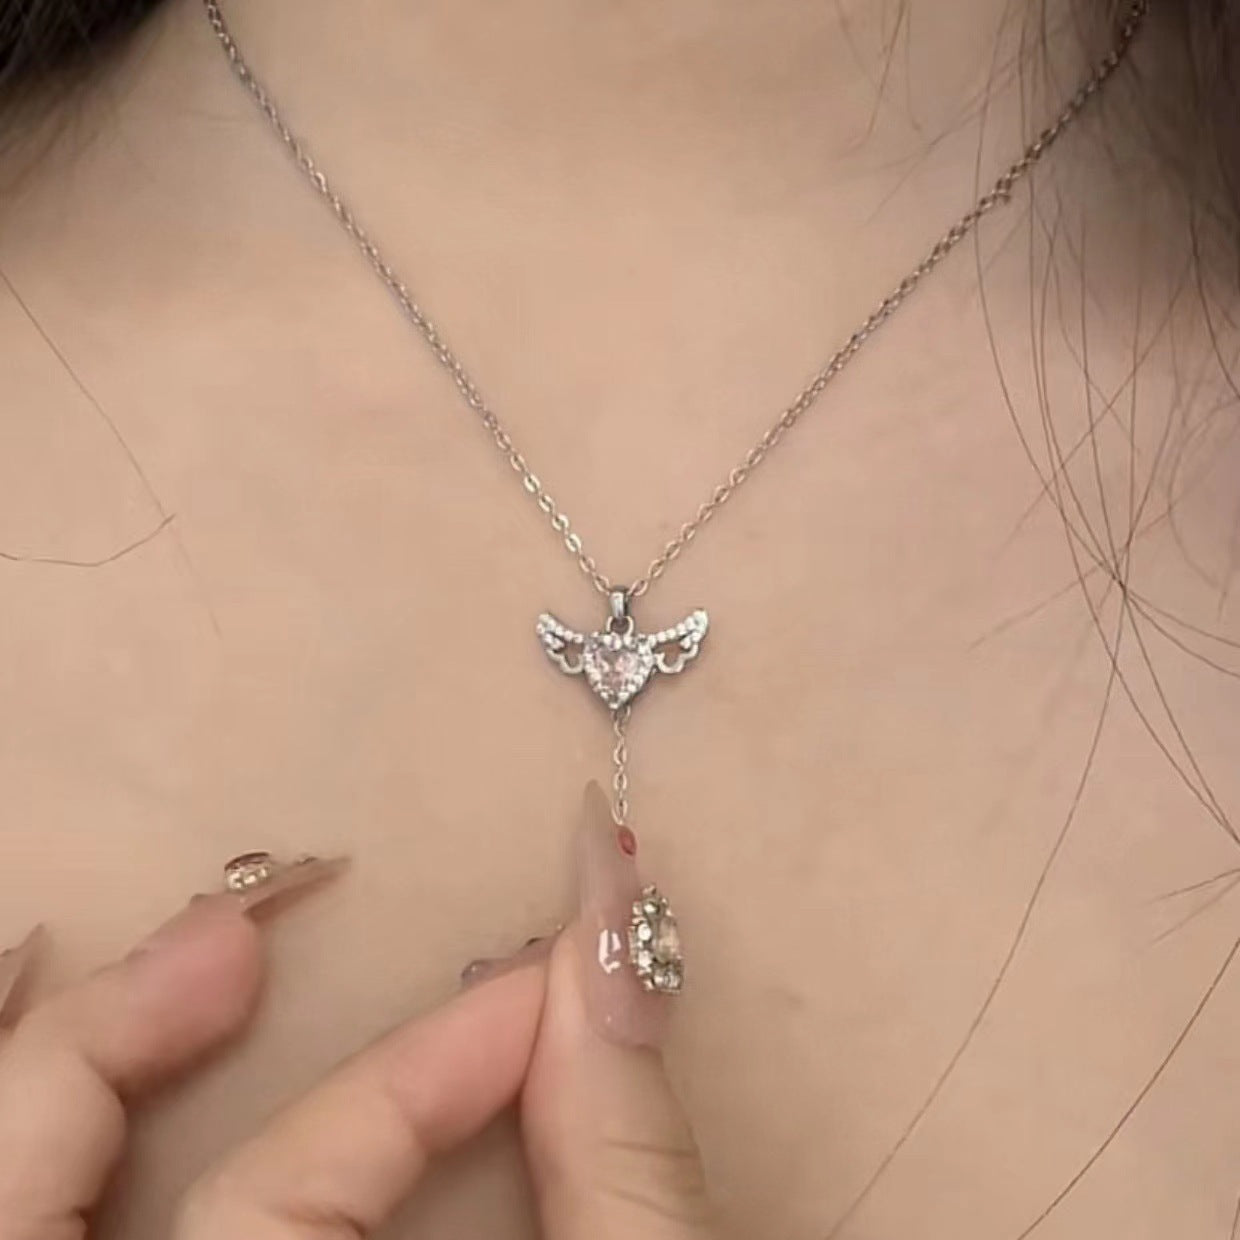 Give Me Your Heart Cupid Necklace